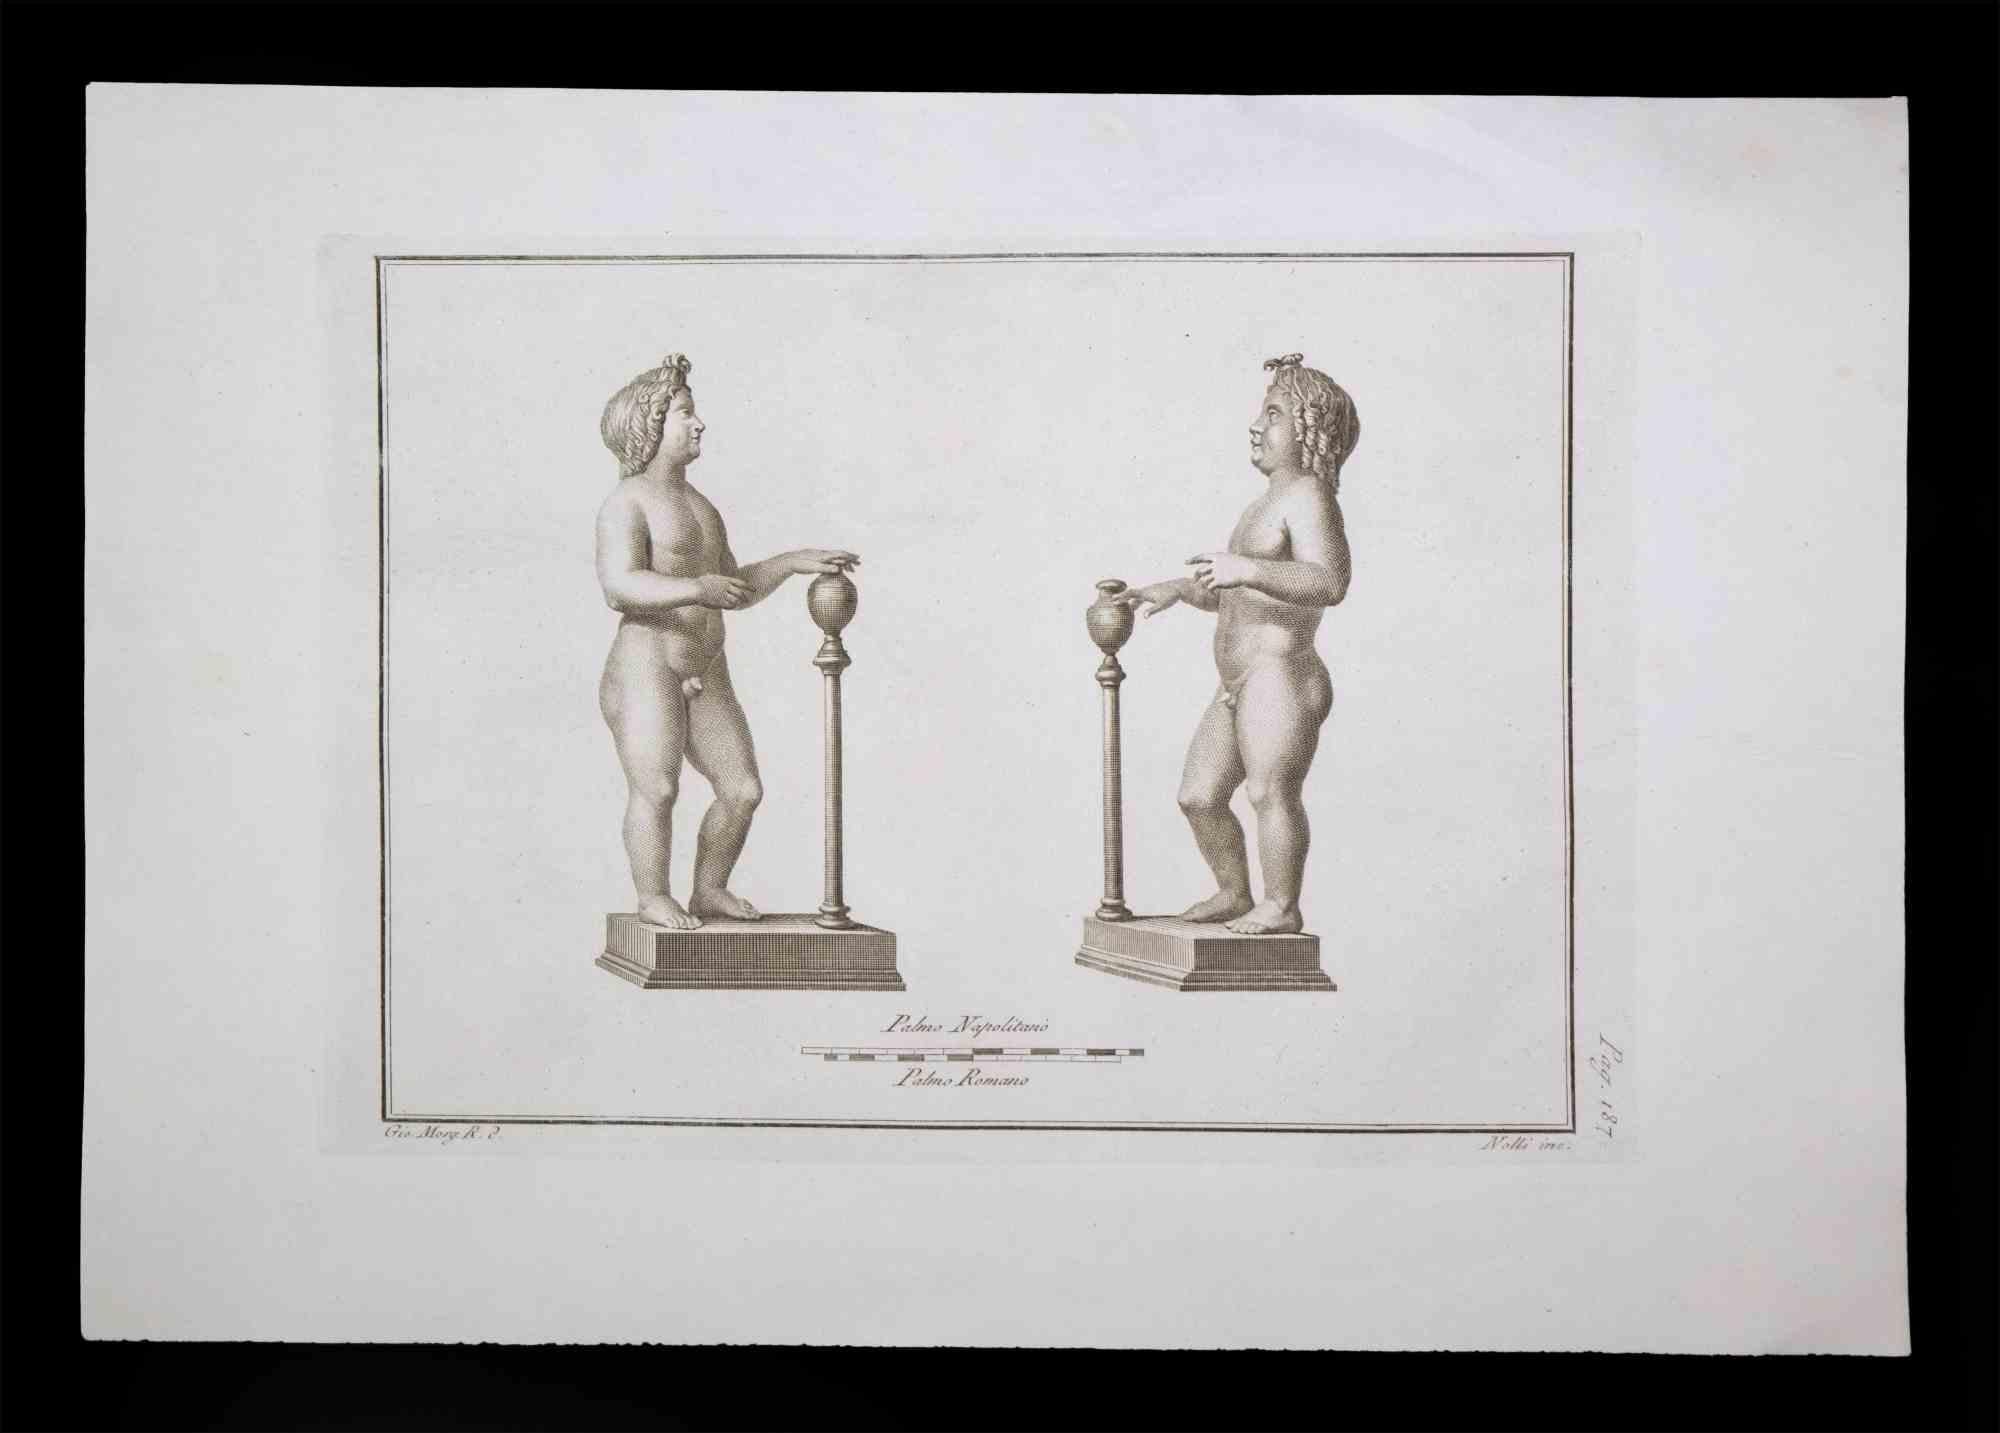 Ancient Roman Statue, from the series "Antiquities of Herculaneum", is an original etching on paper realized by Carlo Nolli in the 18th Century.

Signed on the plate, on the lower right.

Good conditions with slight folding.

The etching belongs to